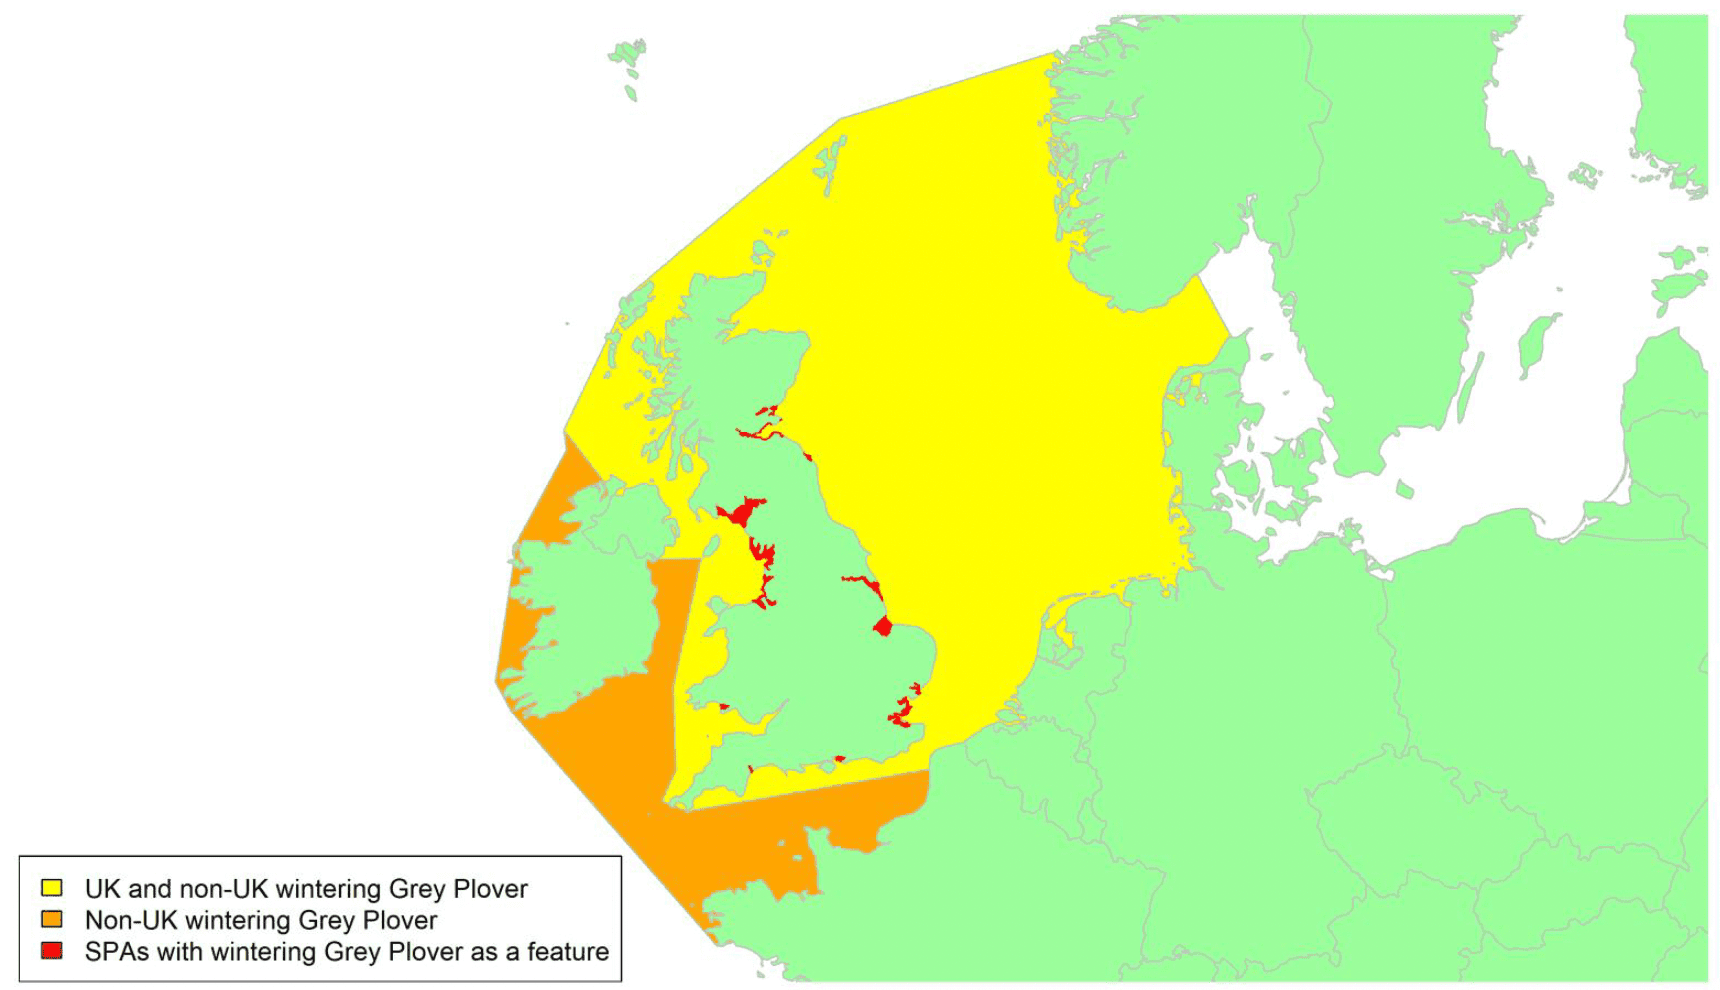 Map of North West Europe showing migratory routes and SPAs within the UK for Grey Plover as described in the text below.